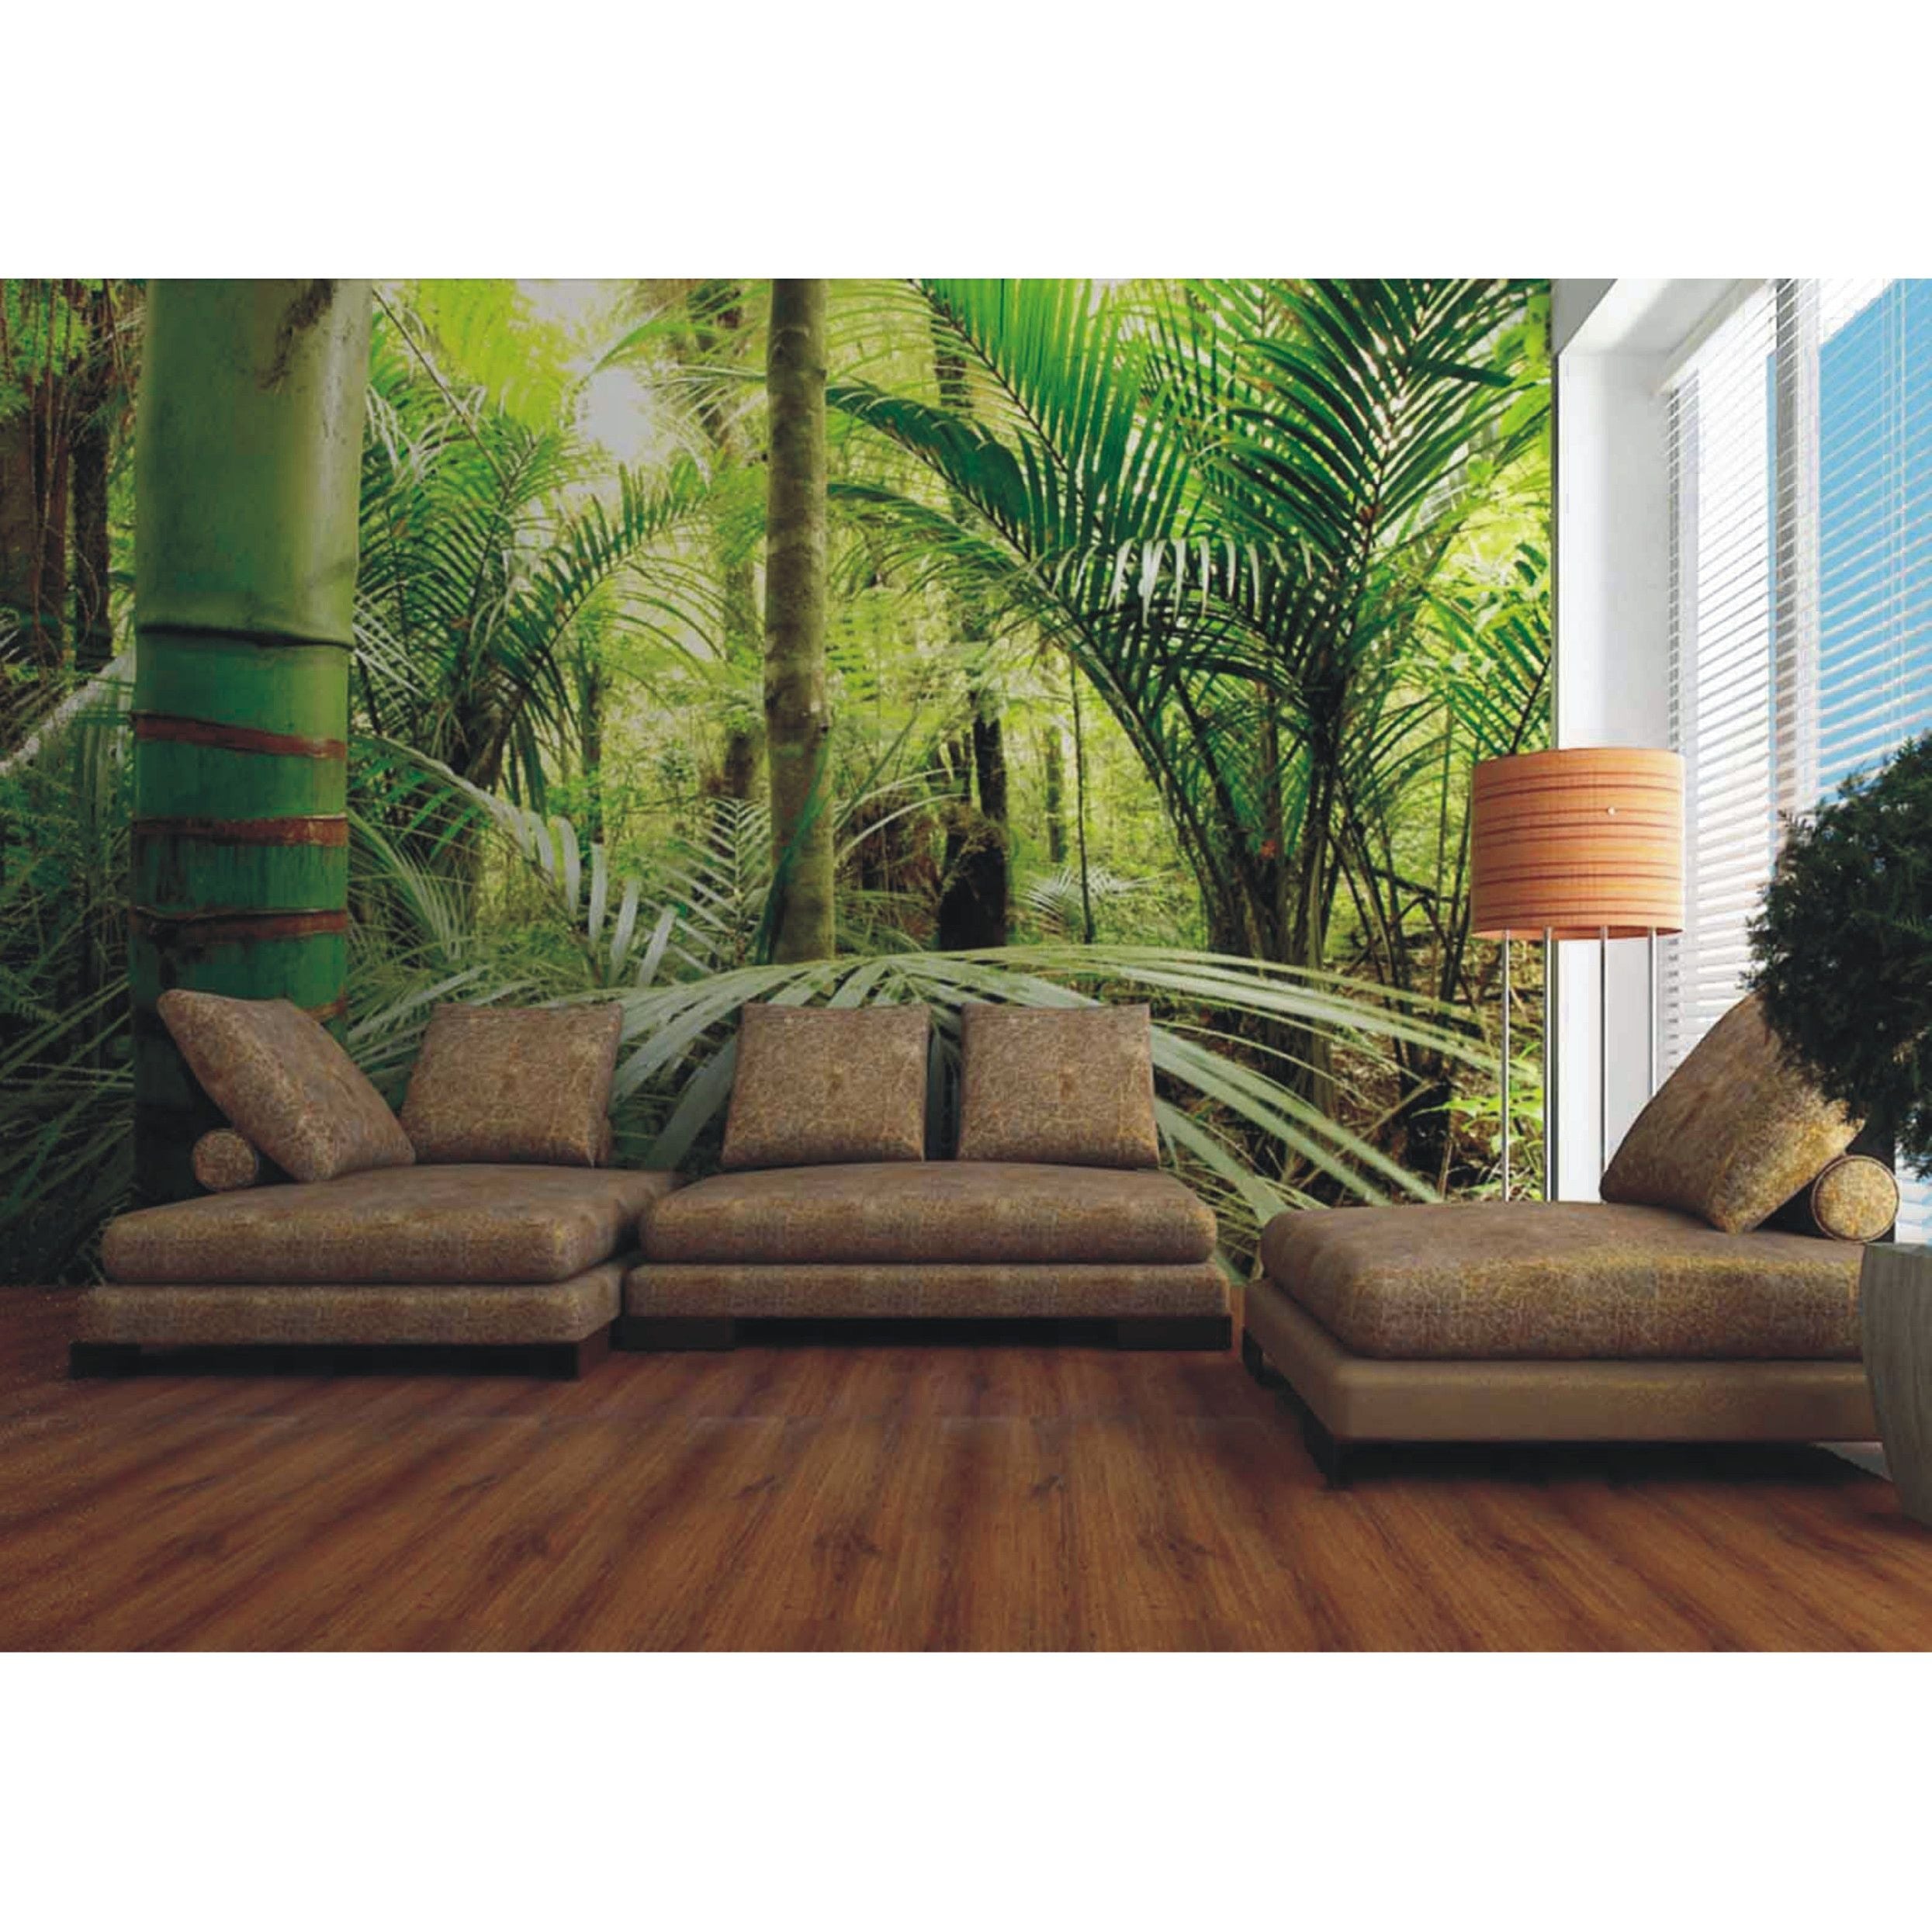 Verdant Canopy: Forest with Green Leafs Wall Mural